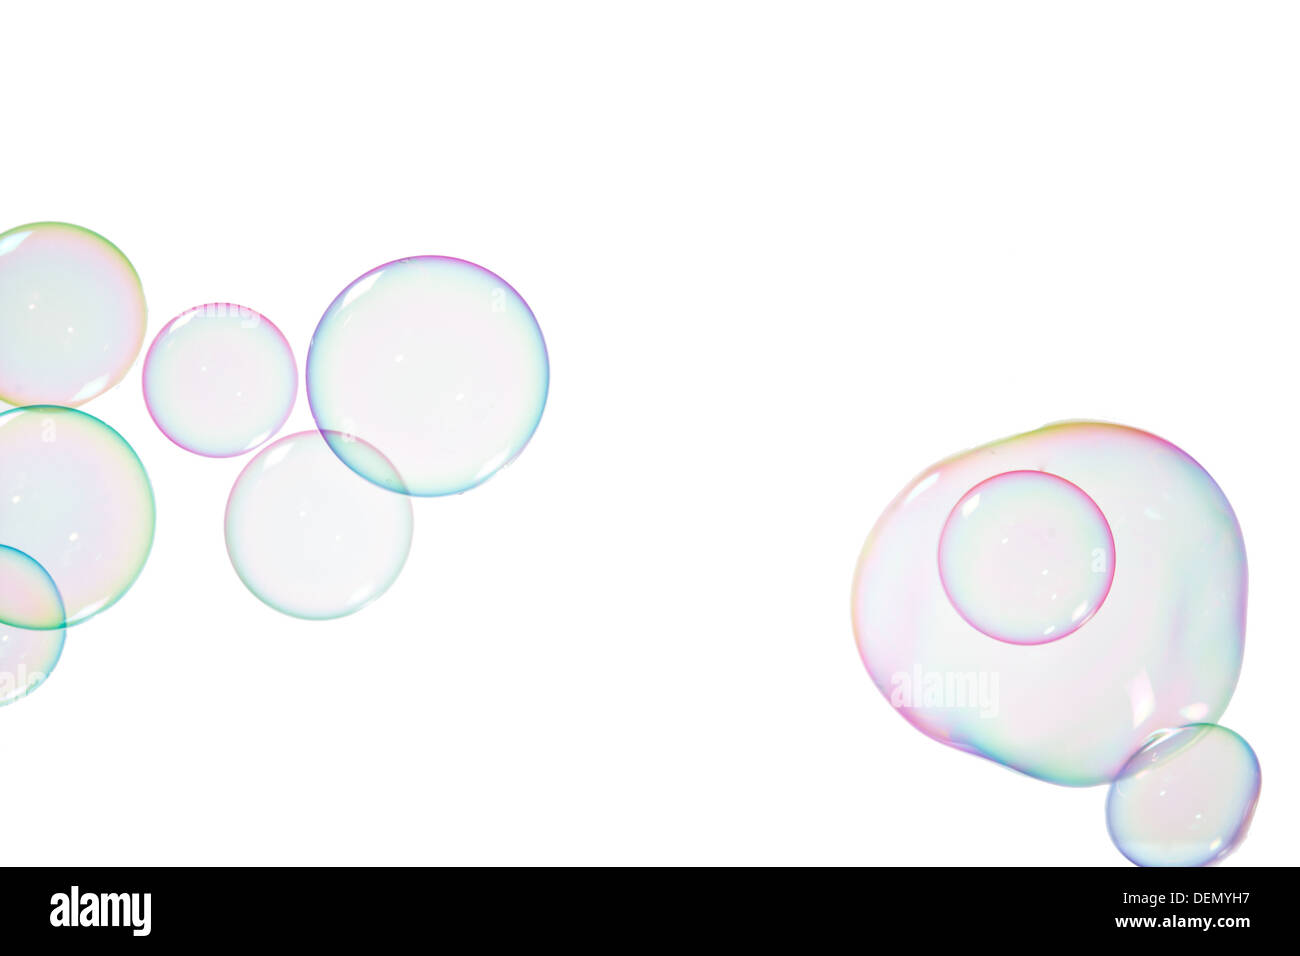 Group of soap bubbles on a white background Stock Photo